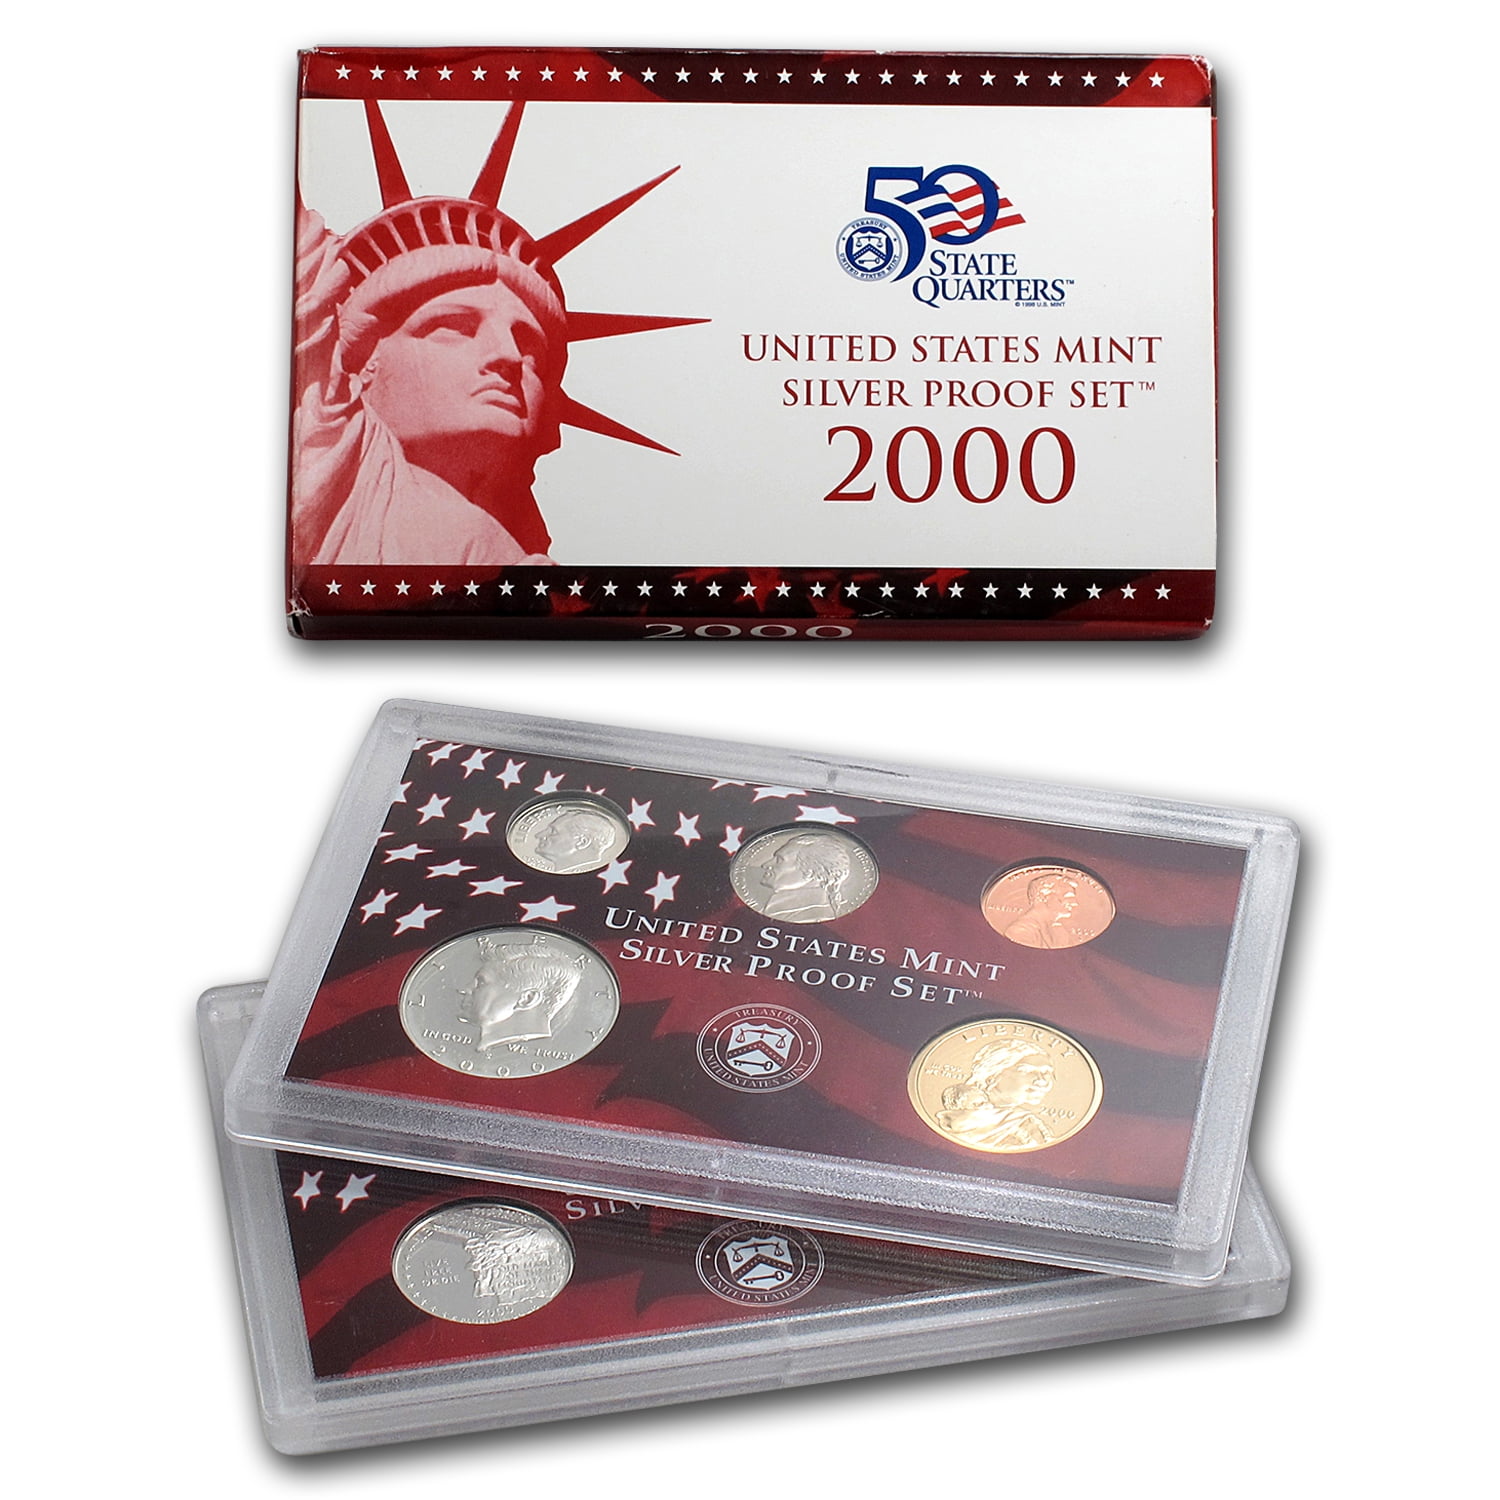 2000 UNITED STATES MINT SILVER PROOF SET 10 COIN SET